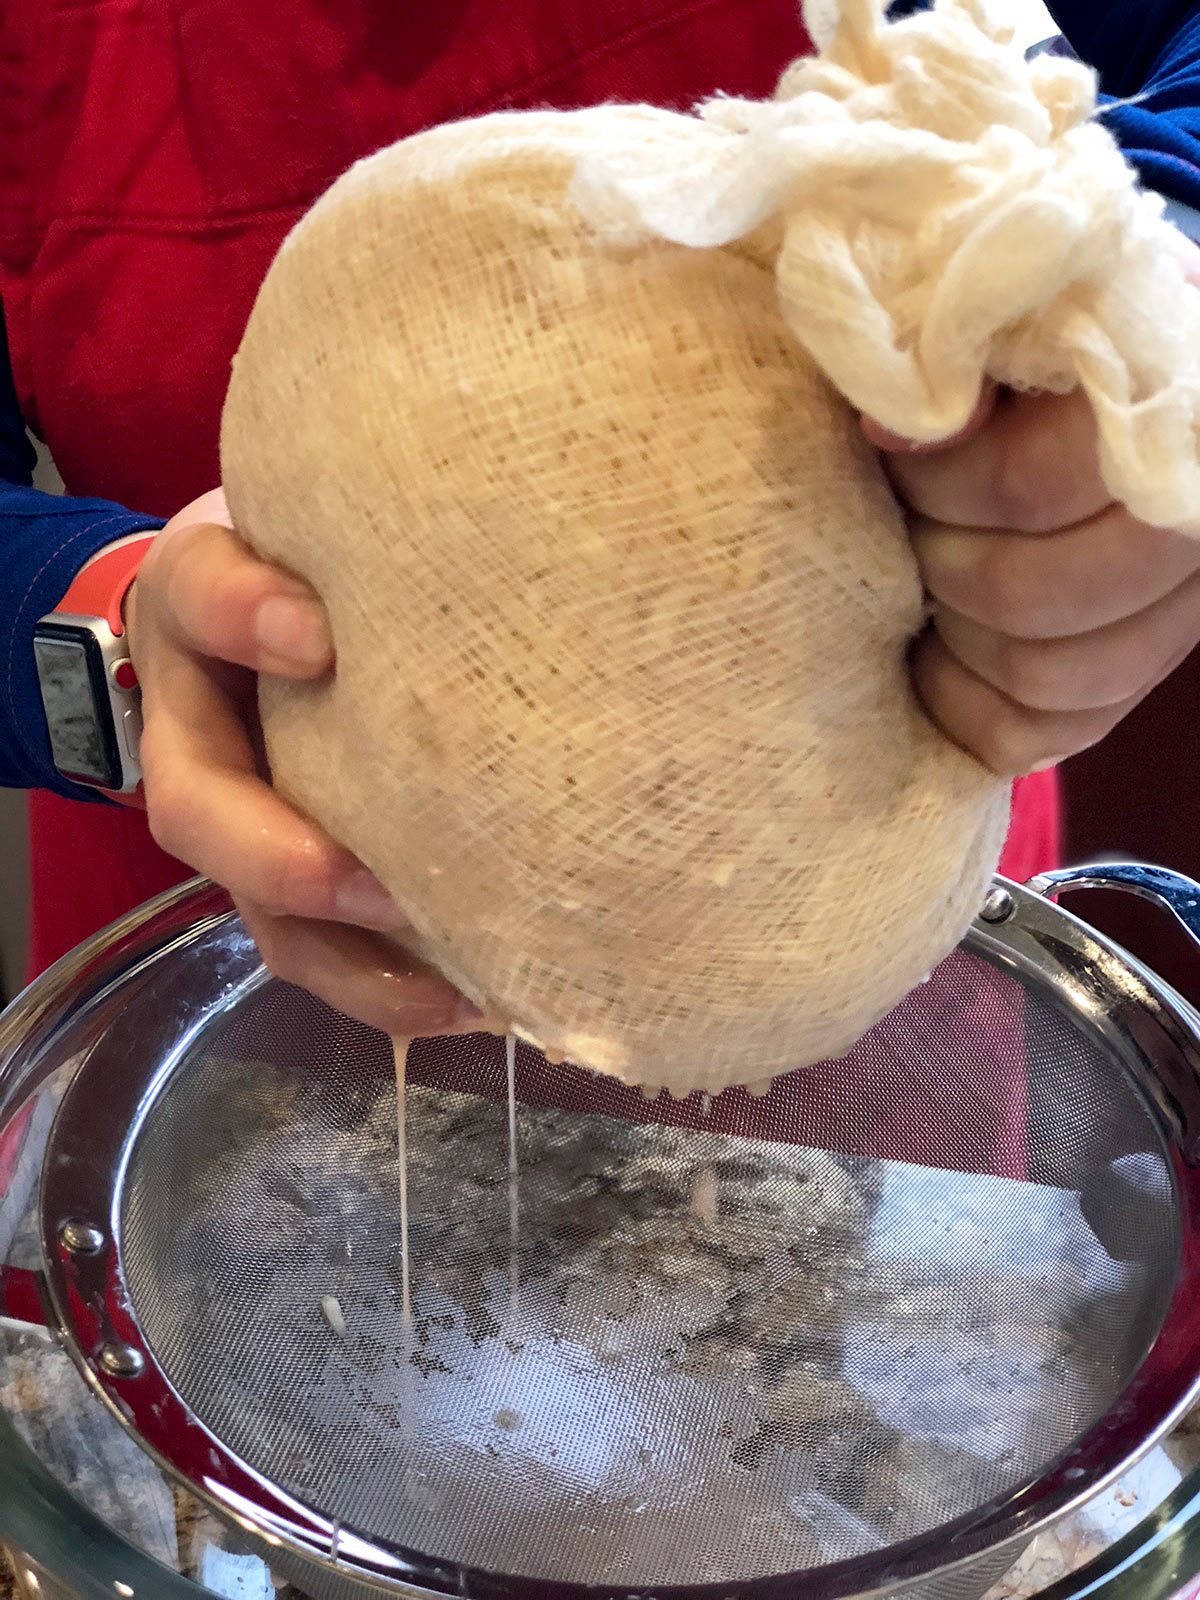 Close up showing potato mixture being wrung out of cheesecloth.